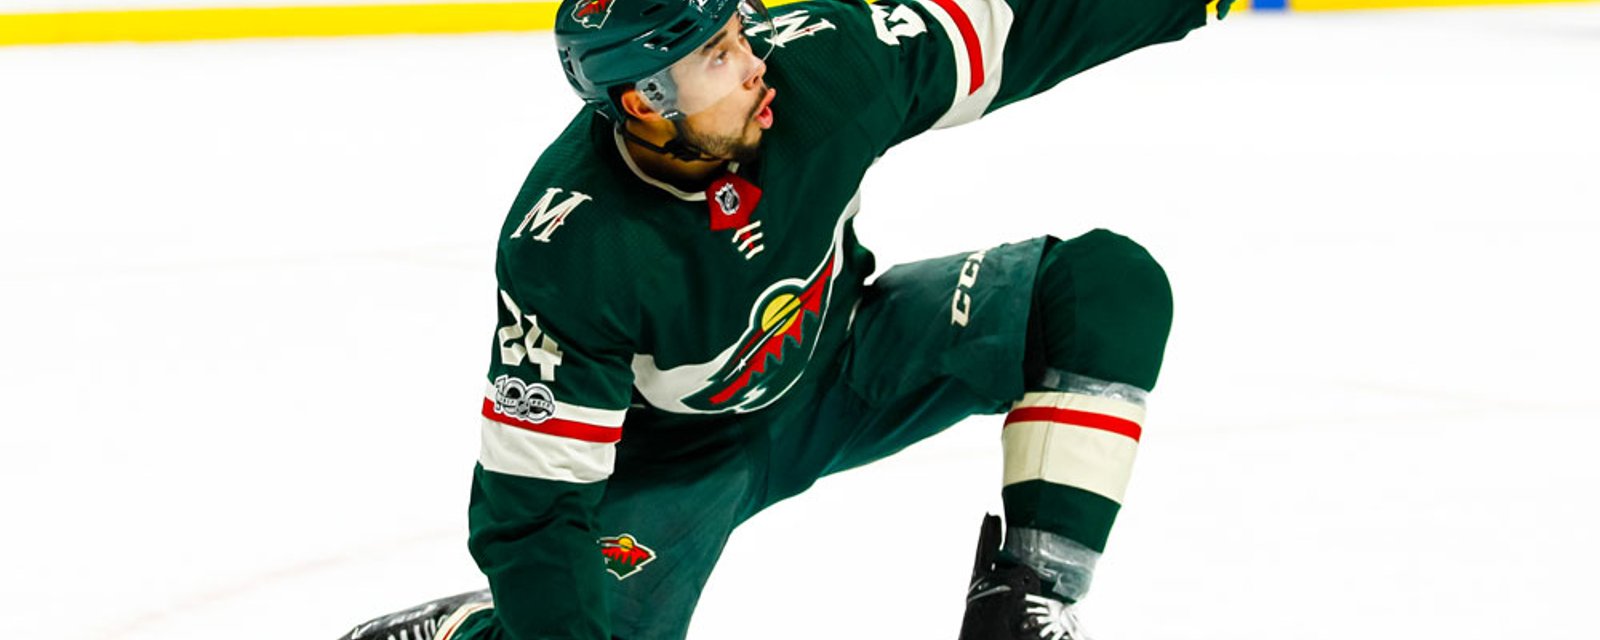 It's official, Matt Dumba signs a one year contract worth less than $4 million